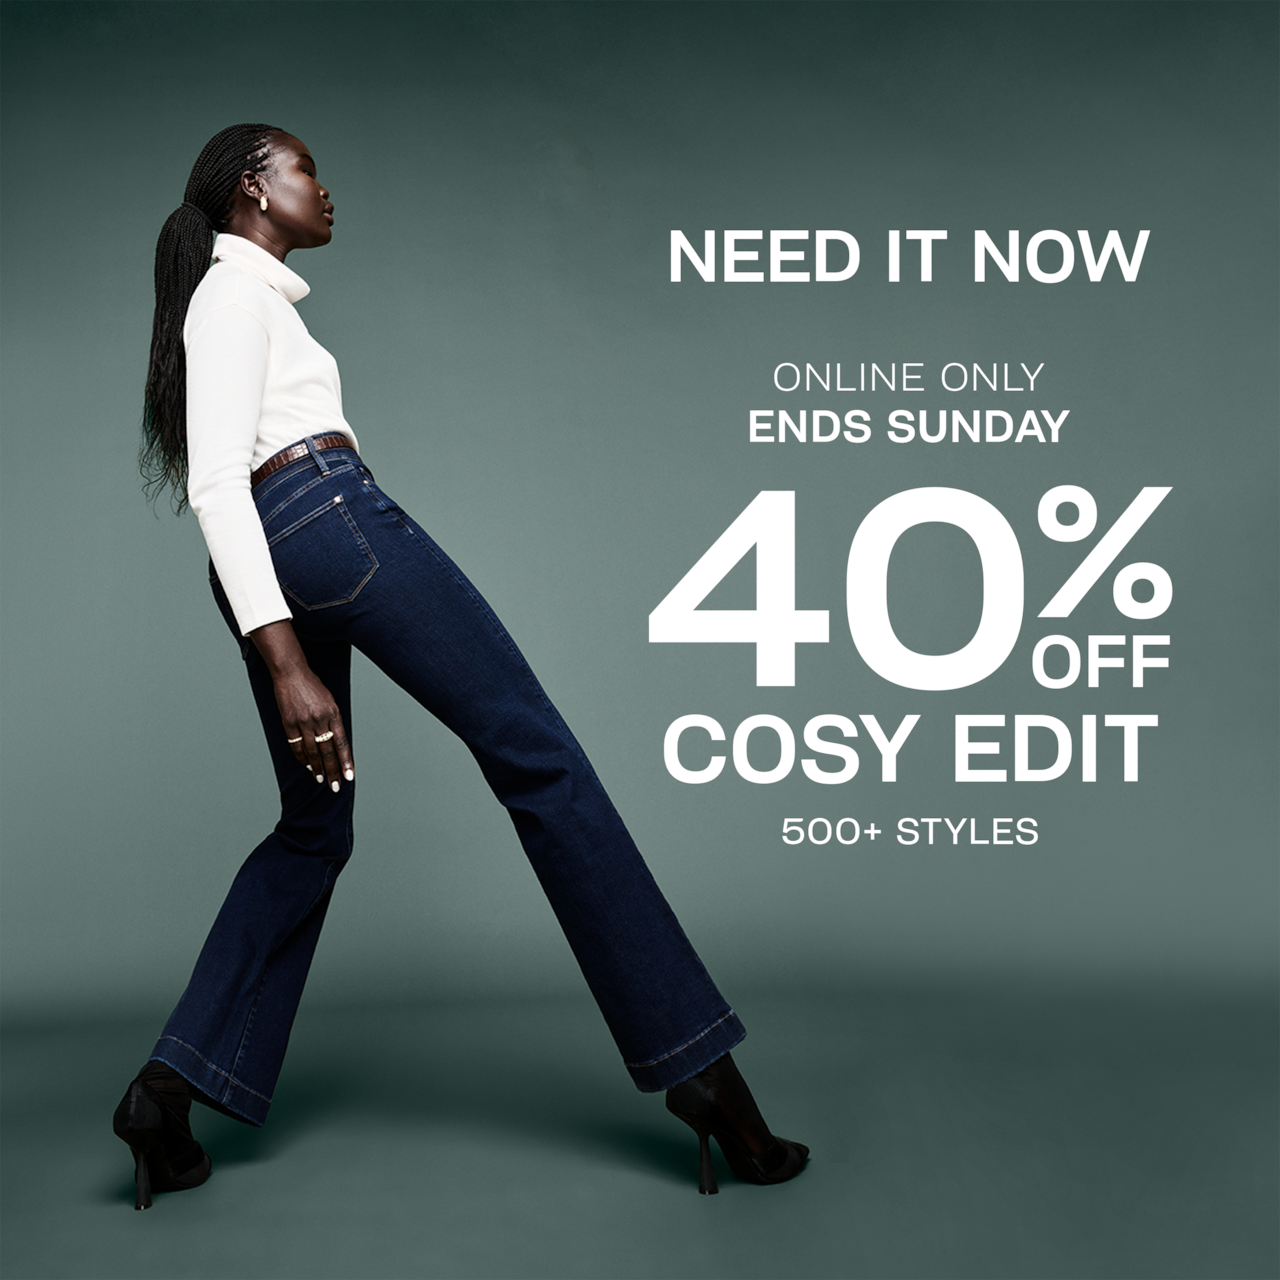 Need it Now. Online Only. Ends Sunday. 40% Off Cosy Edits.